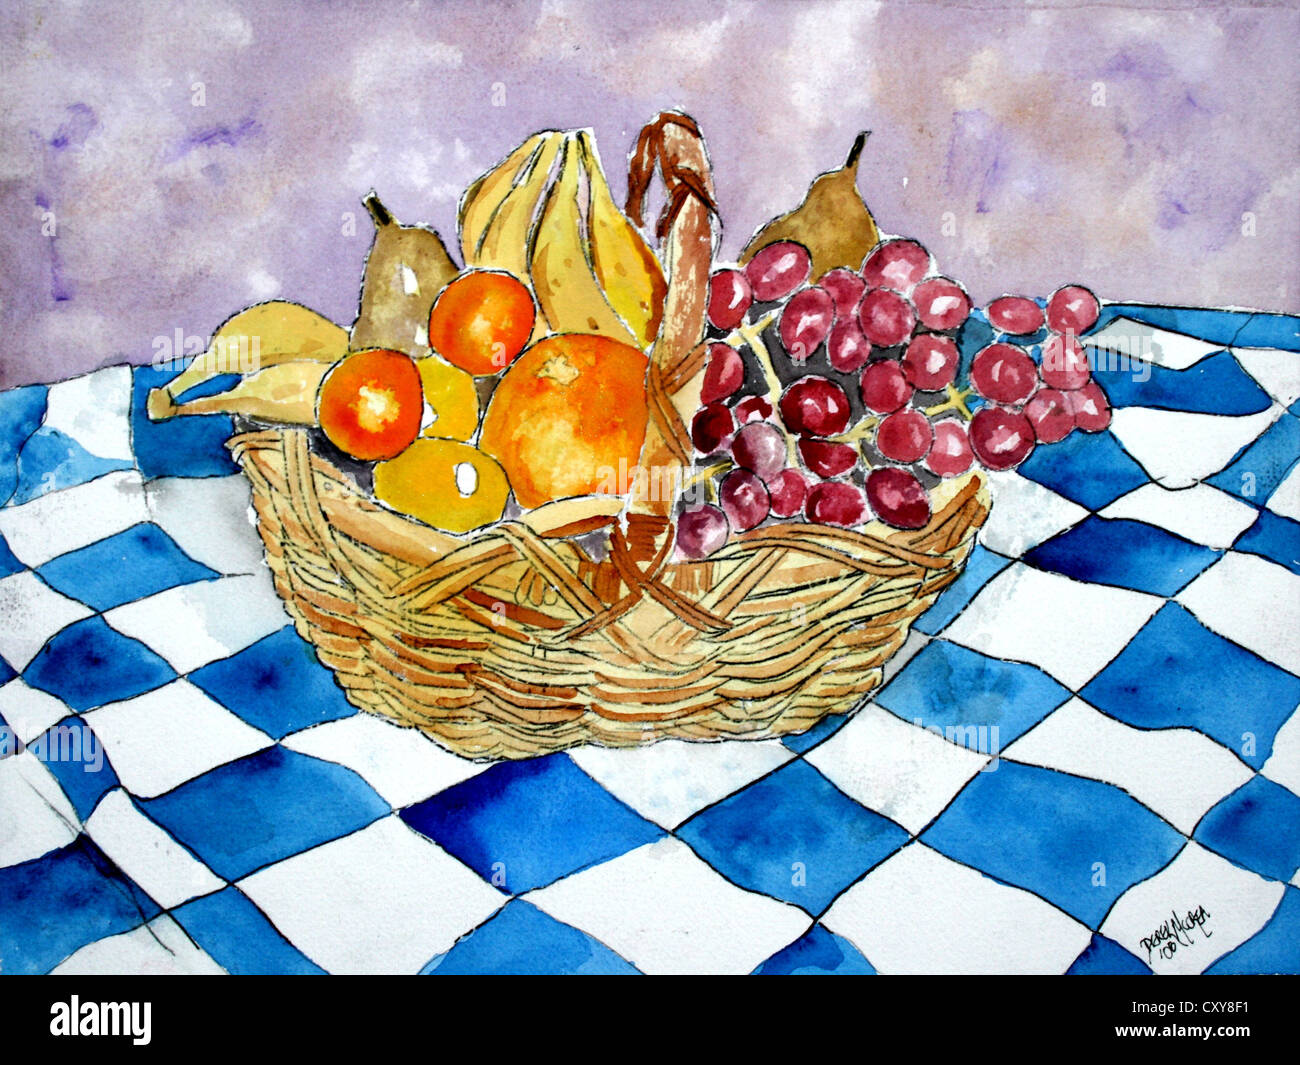 Still life watercolor painting Stock Photo